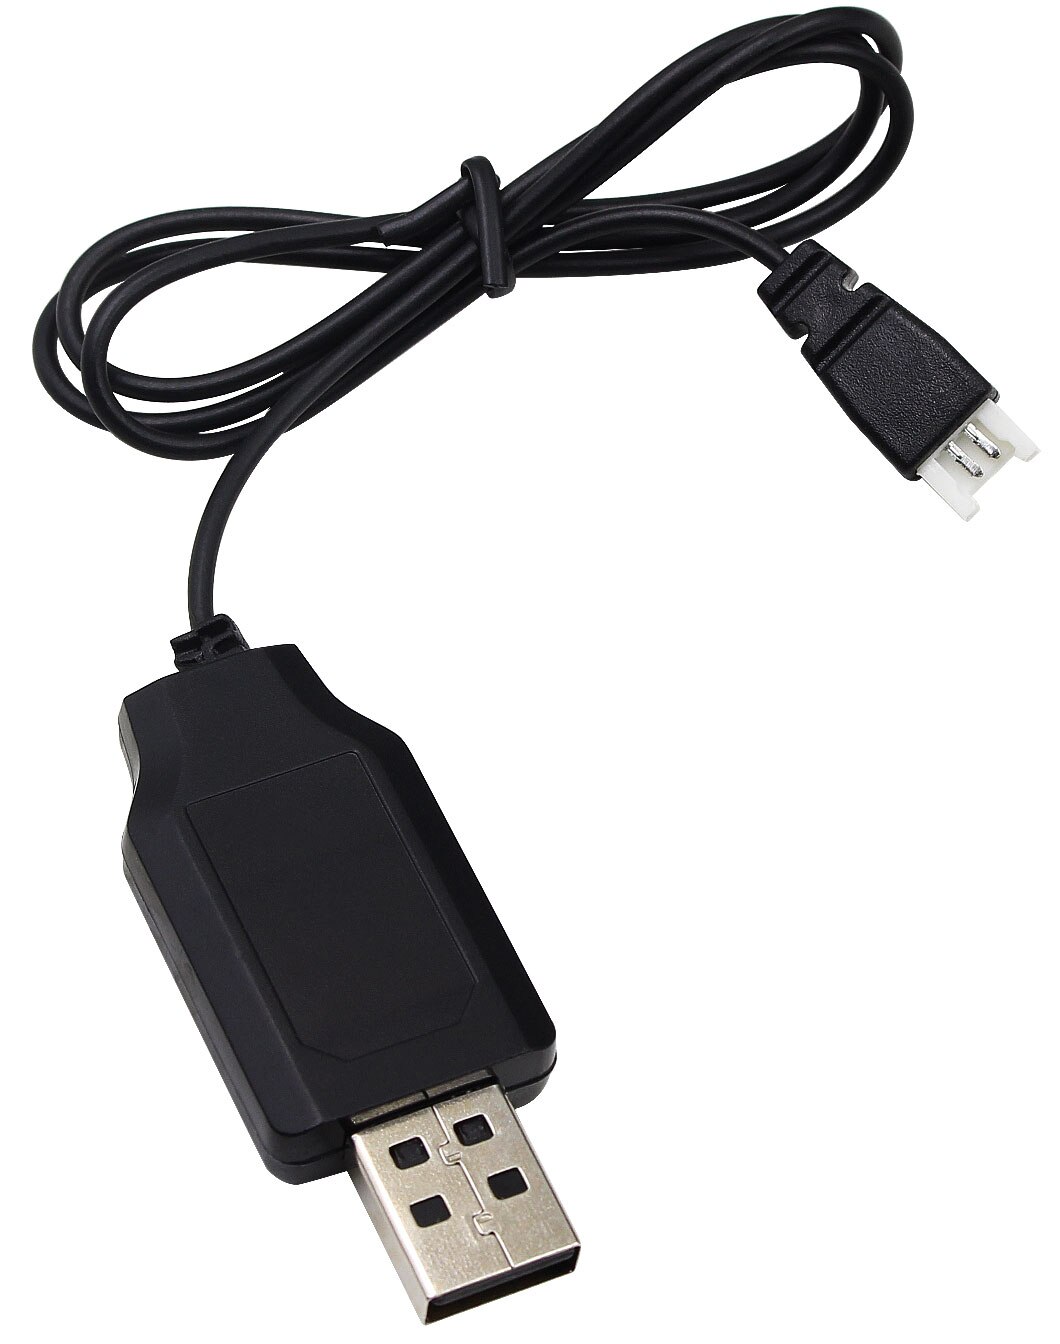 Usb Battery Charger Charging Cable Cord Lead Voor Estes Dart